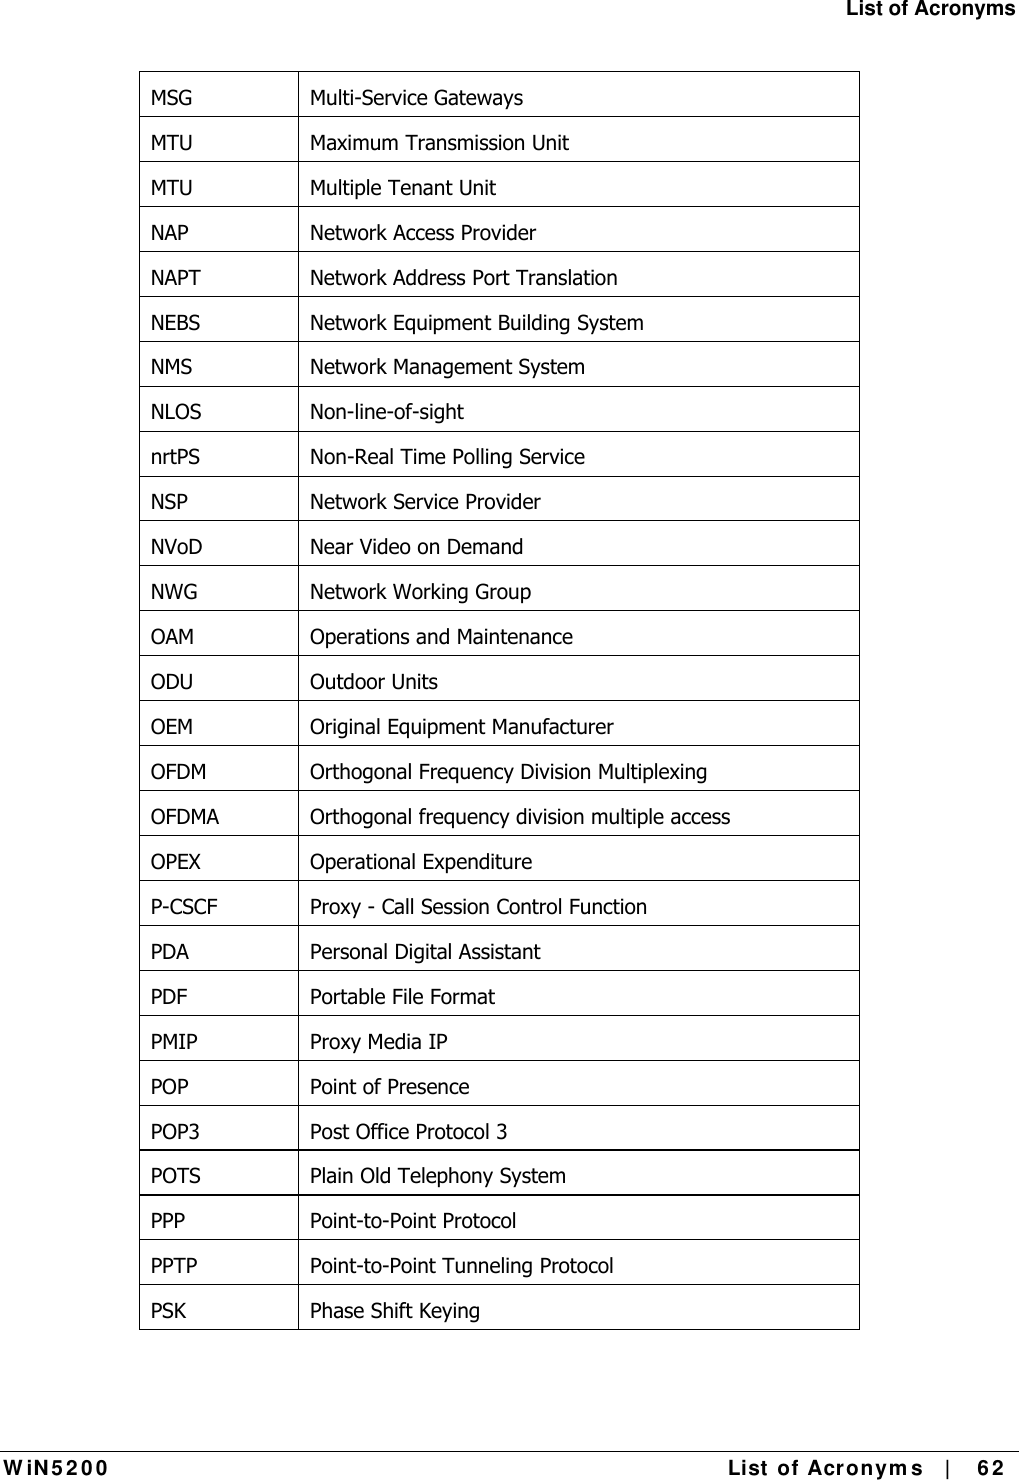 List of Acronyms W iN 5 2 0 0   List  of Acron ym s   |    6 2  MSG Multi-Service Gateways MTU Maximum Transmission Unit MTU  Multiple Tenant Unit NAP  Network Access Provider NAPT  Network Address Port Translation NEBS  Network Equipment Building System NMS Network Management System NLOS Non-line-of-sight nrtPS  Non-Real Time Polling Service NSP  Network Service Provider NVoD  Near Video on Demand NWG Network Working Group OAM Operations and Maintenance ODU Outdoor Units OEM  Original Equipment Manufacturer OFDM  Orthogonal Frequency Division Multiplexing OFDMA  Orthogonal frequency division multiple access OPEX Operational Expenditure P-CSCF  Proxy - Call Session Control Function PDA  Personal Digital Assistant PDF  Portable File Format PMIP Proxy Media IP POP  Point of Presence POP3  Post Office Protocol 3 POTS  Plain Old Telephony System PPP Point-to-Point Protocol PPTP  Point-to-Point Tunneling Protocol PSK  Phase Shift Keying 